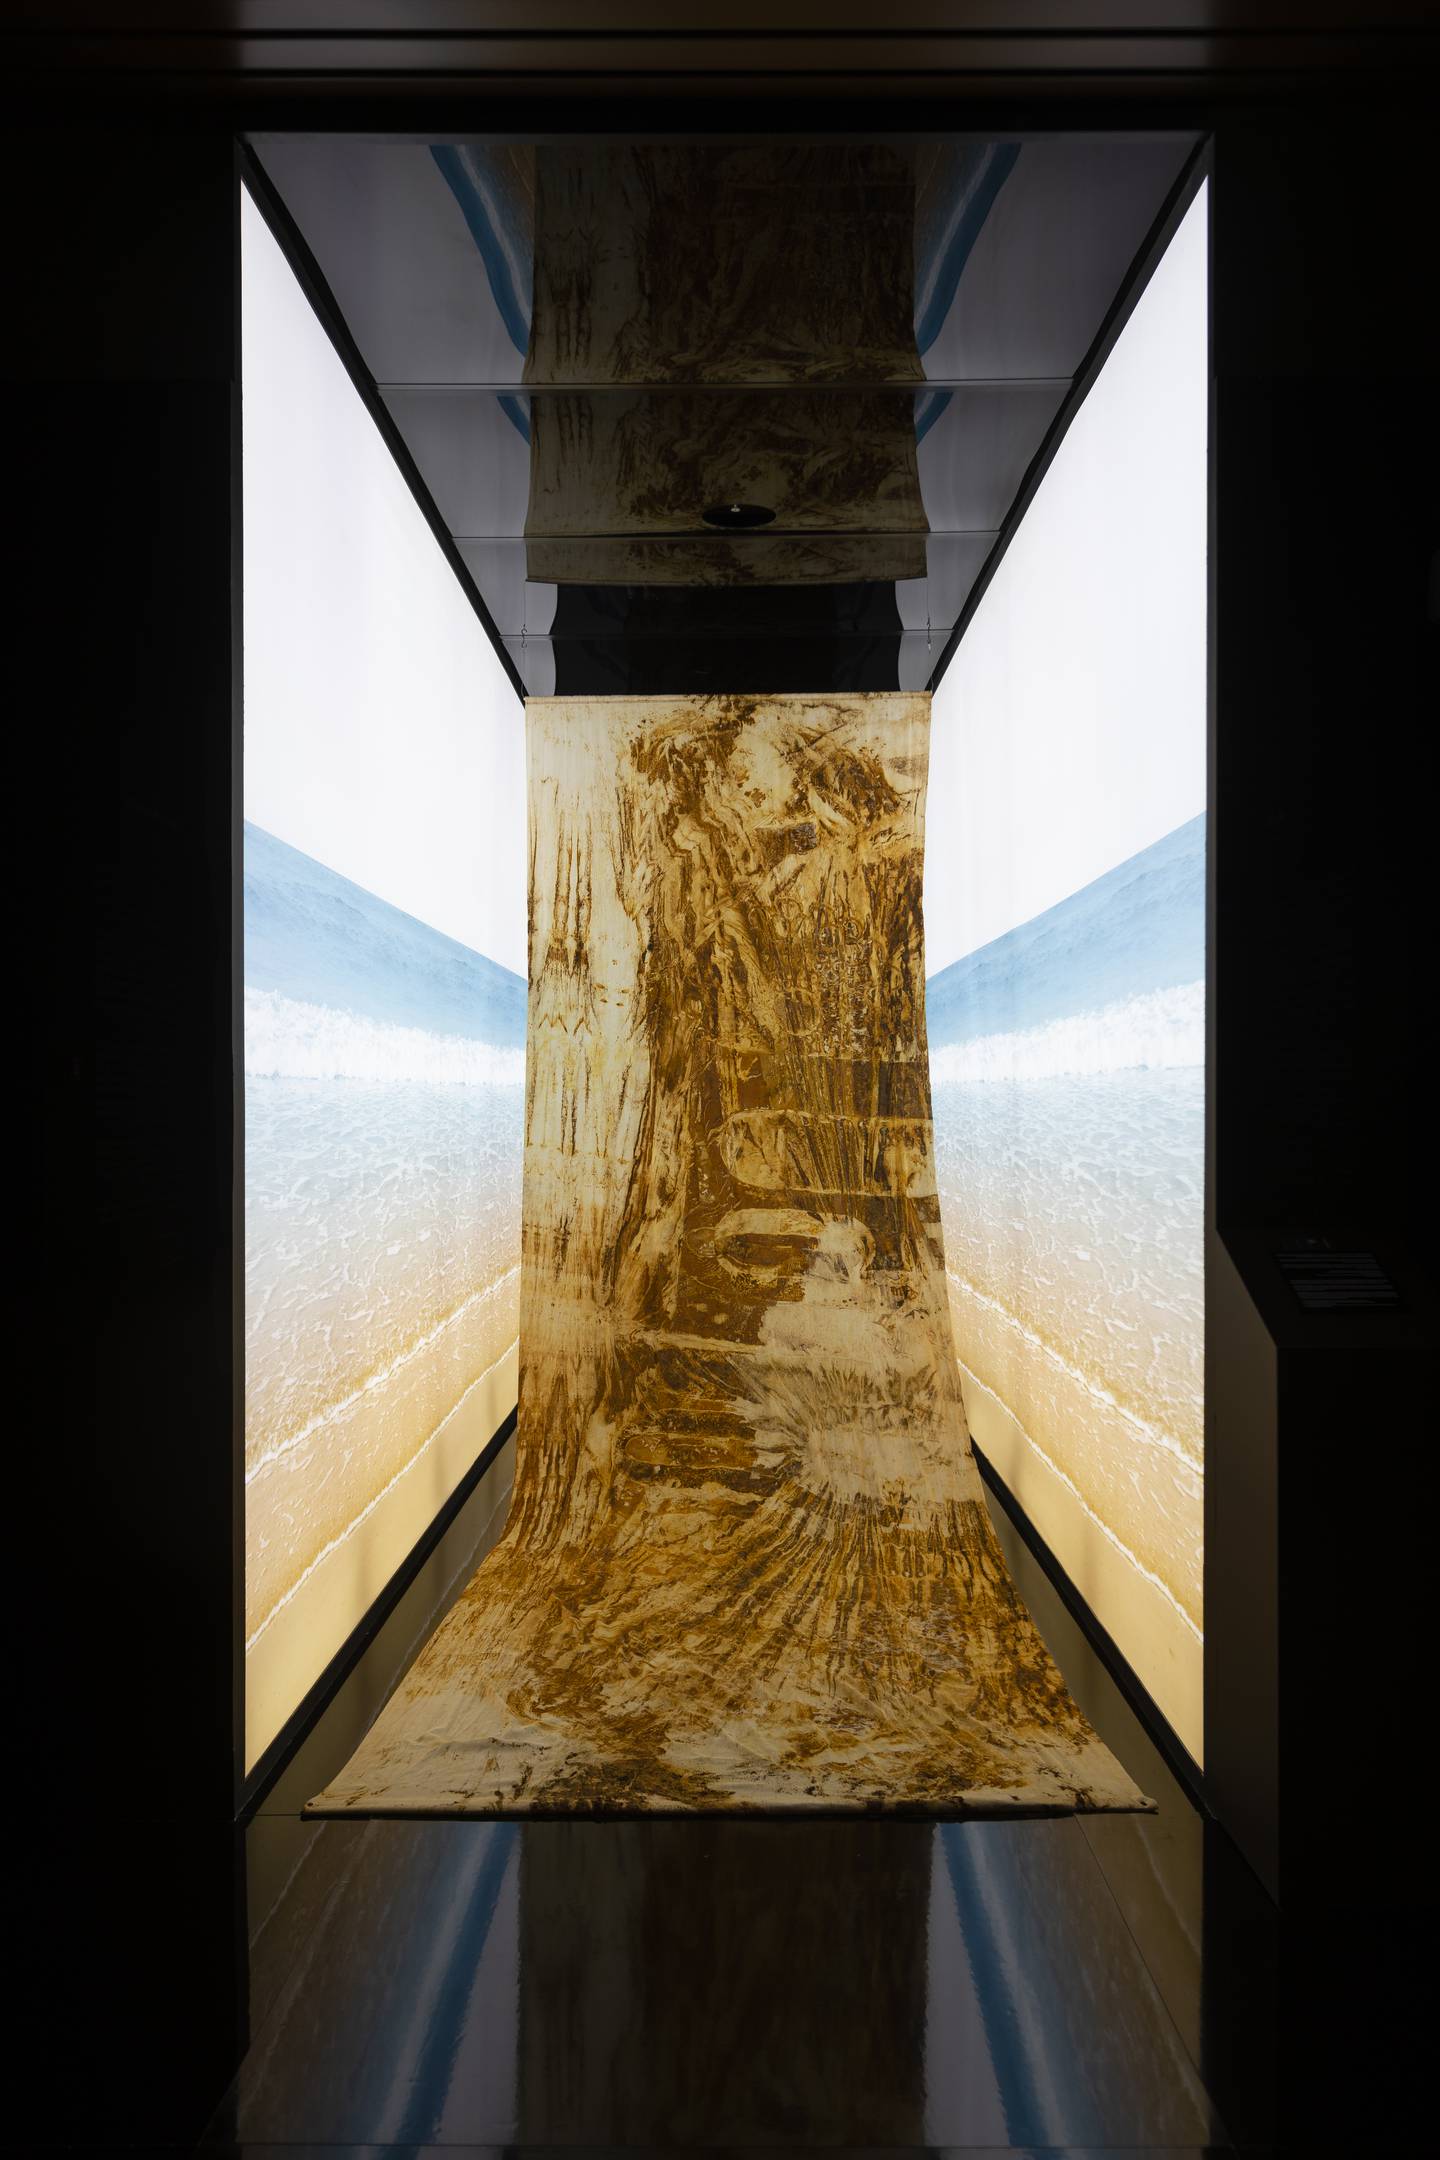 The welcoming work at the exhibition space features Al Astad's danat al shawati technique in silk. Photo: Cultural Foundation